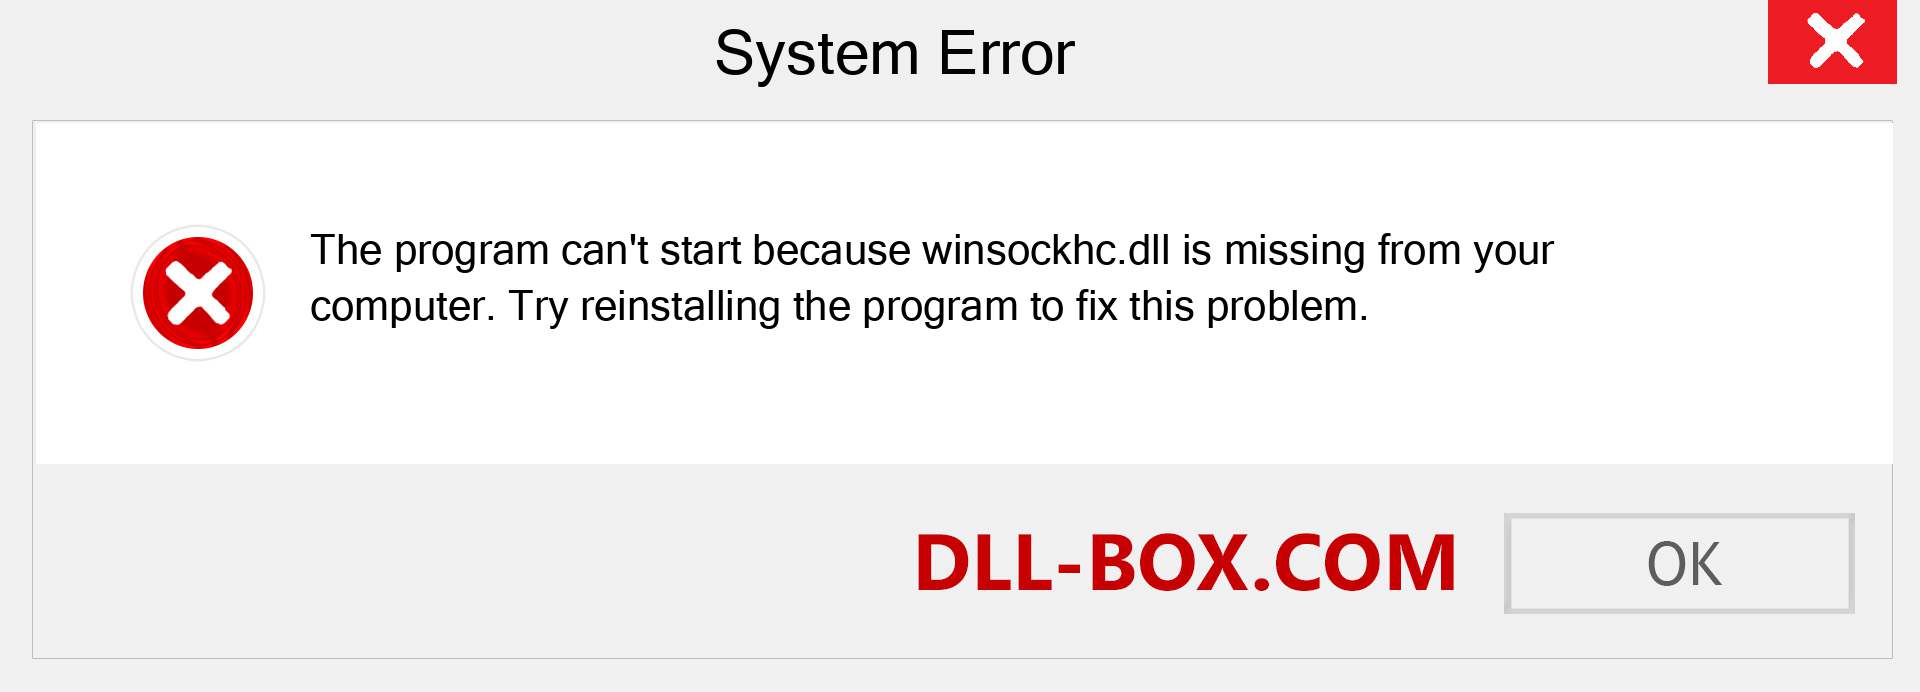  winsockhc.dll file is missing?. Download for Windows 7, 8, 10 - Fix  winsockhc dll Missing Error on Windows, photos, images